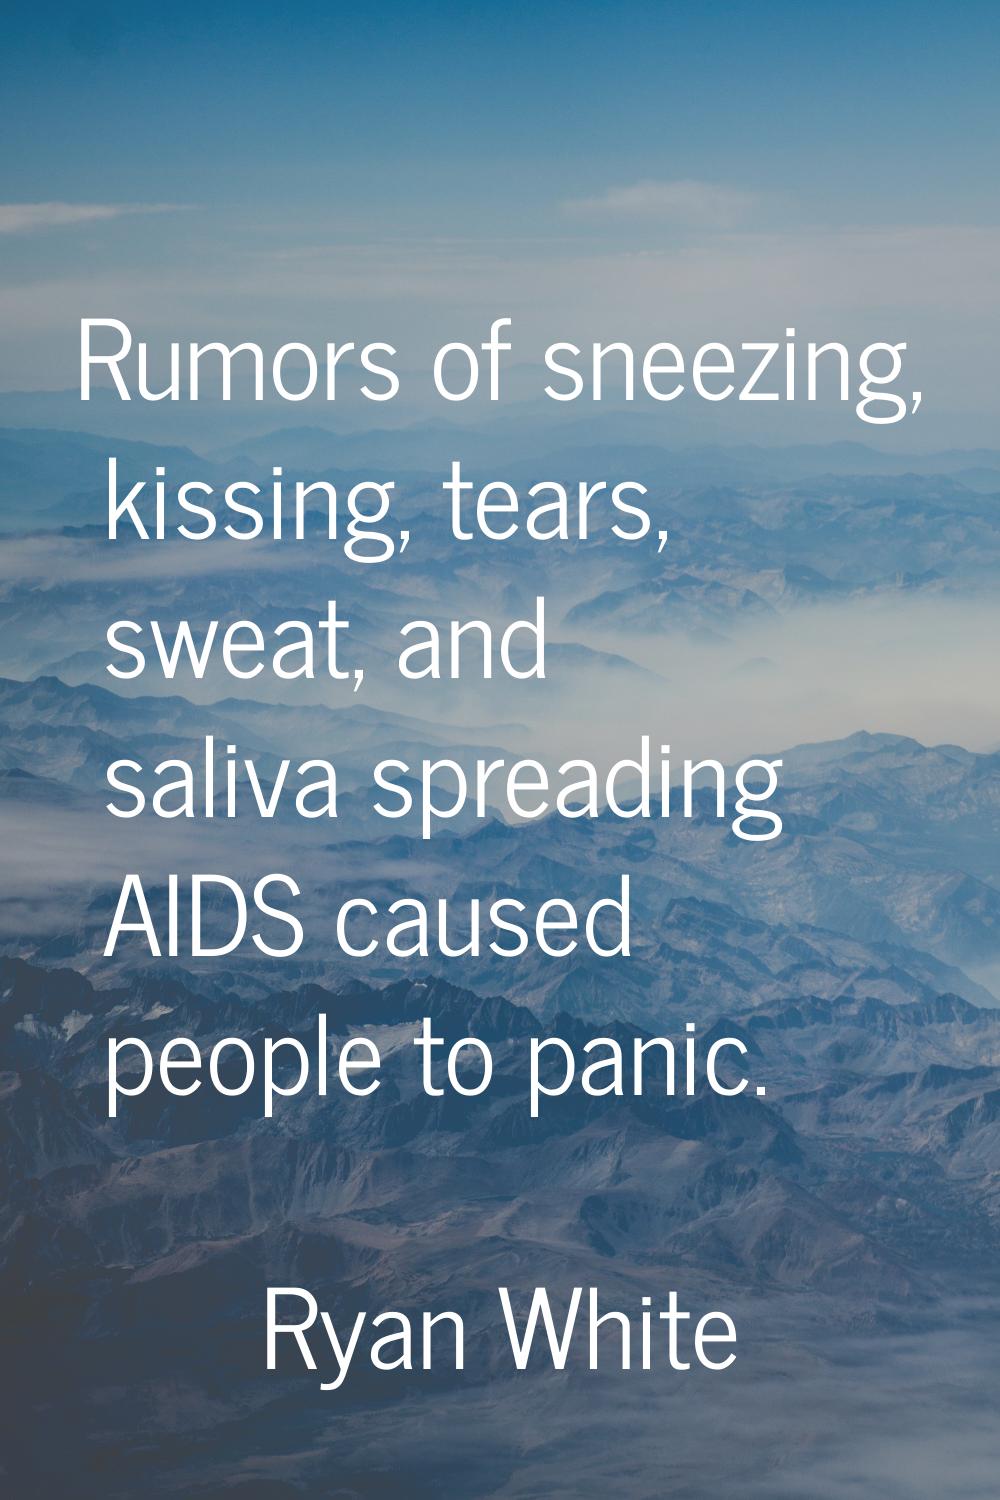 Rumors of sneezing, kissing, tears, sweat, and saliva spreading AIDS caused people to panic.